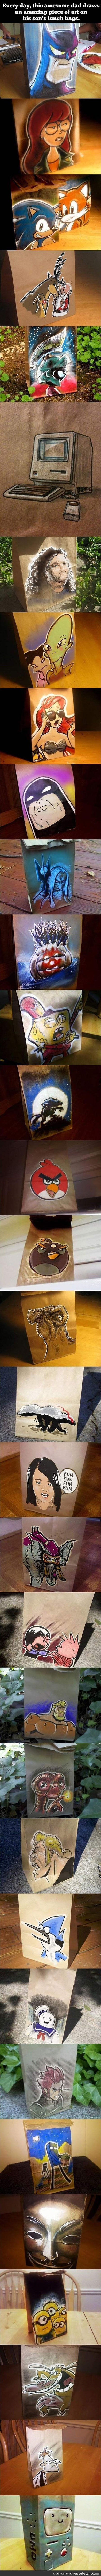 This awesome dad draws on his kids' lunch bags